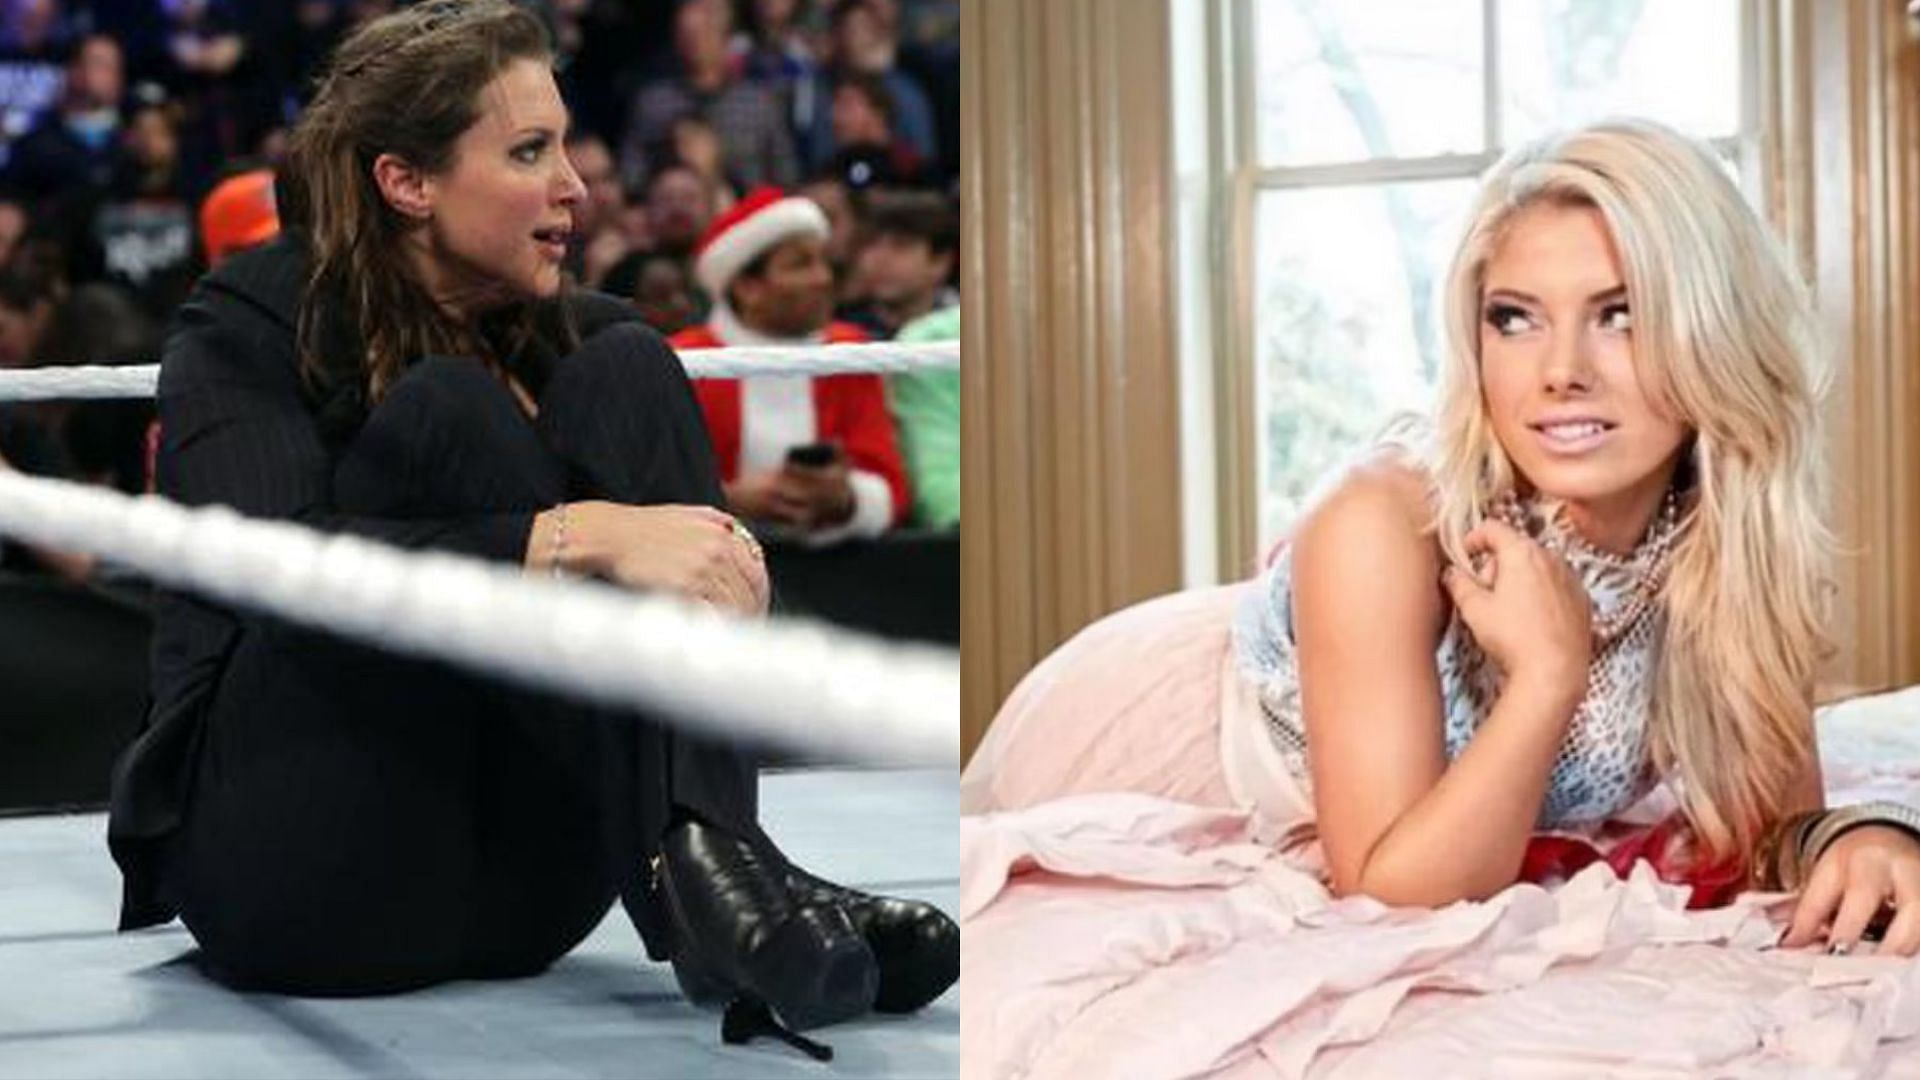 Alexa Bliss and Stephanie McMahon have both been absent for some time now